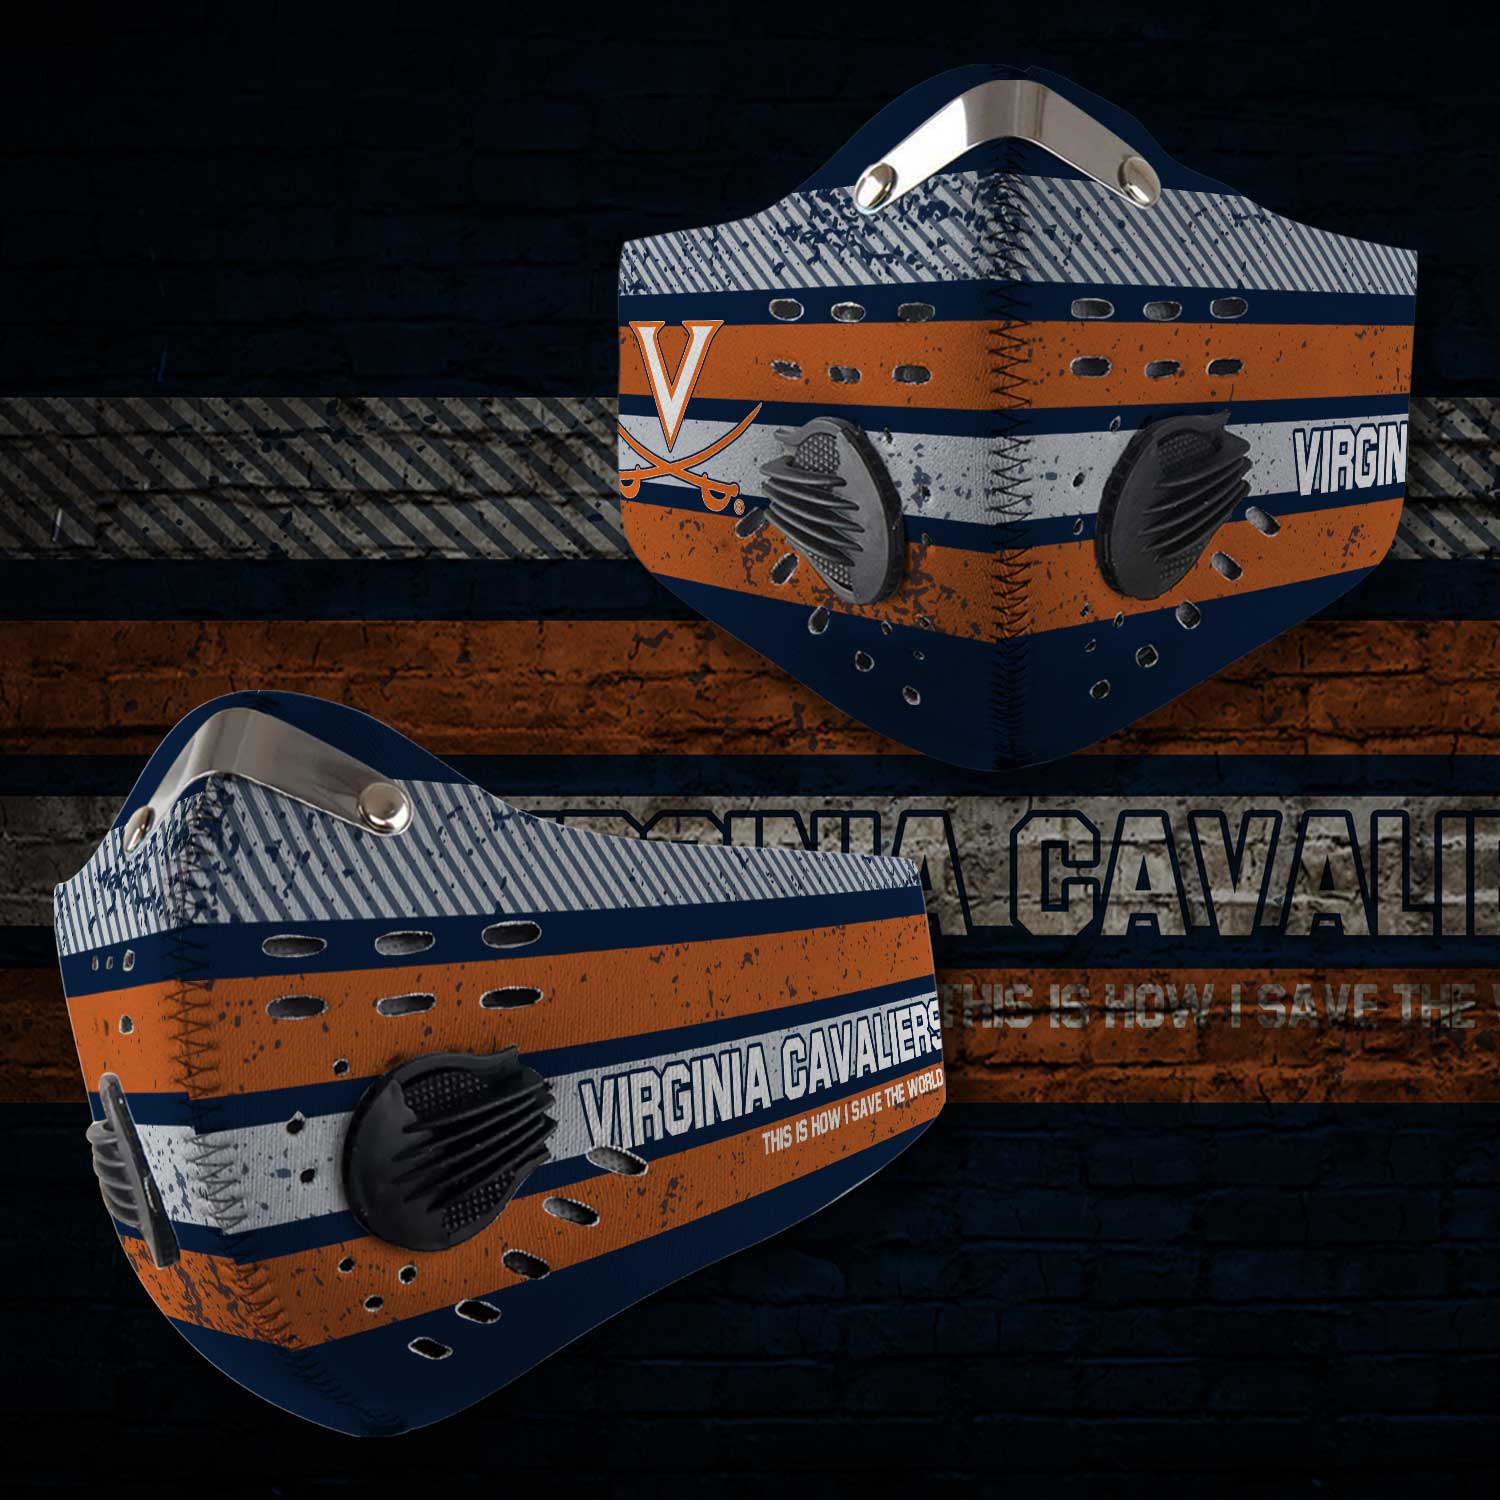 Virginia cavaliers this is how i save the world carbon filter face mask 2